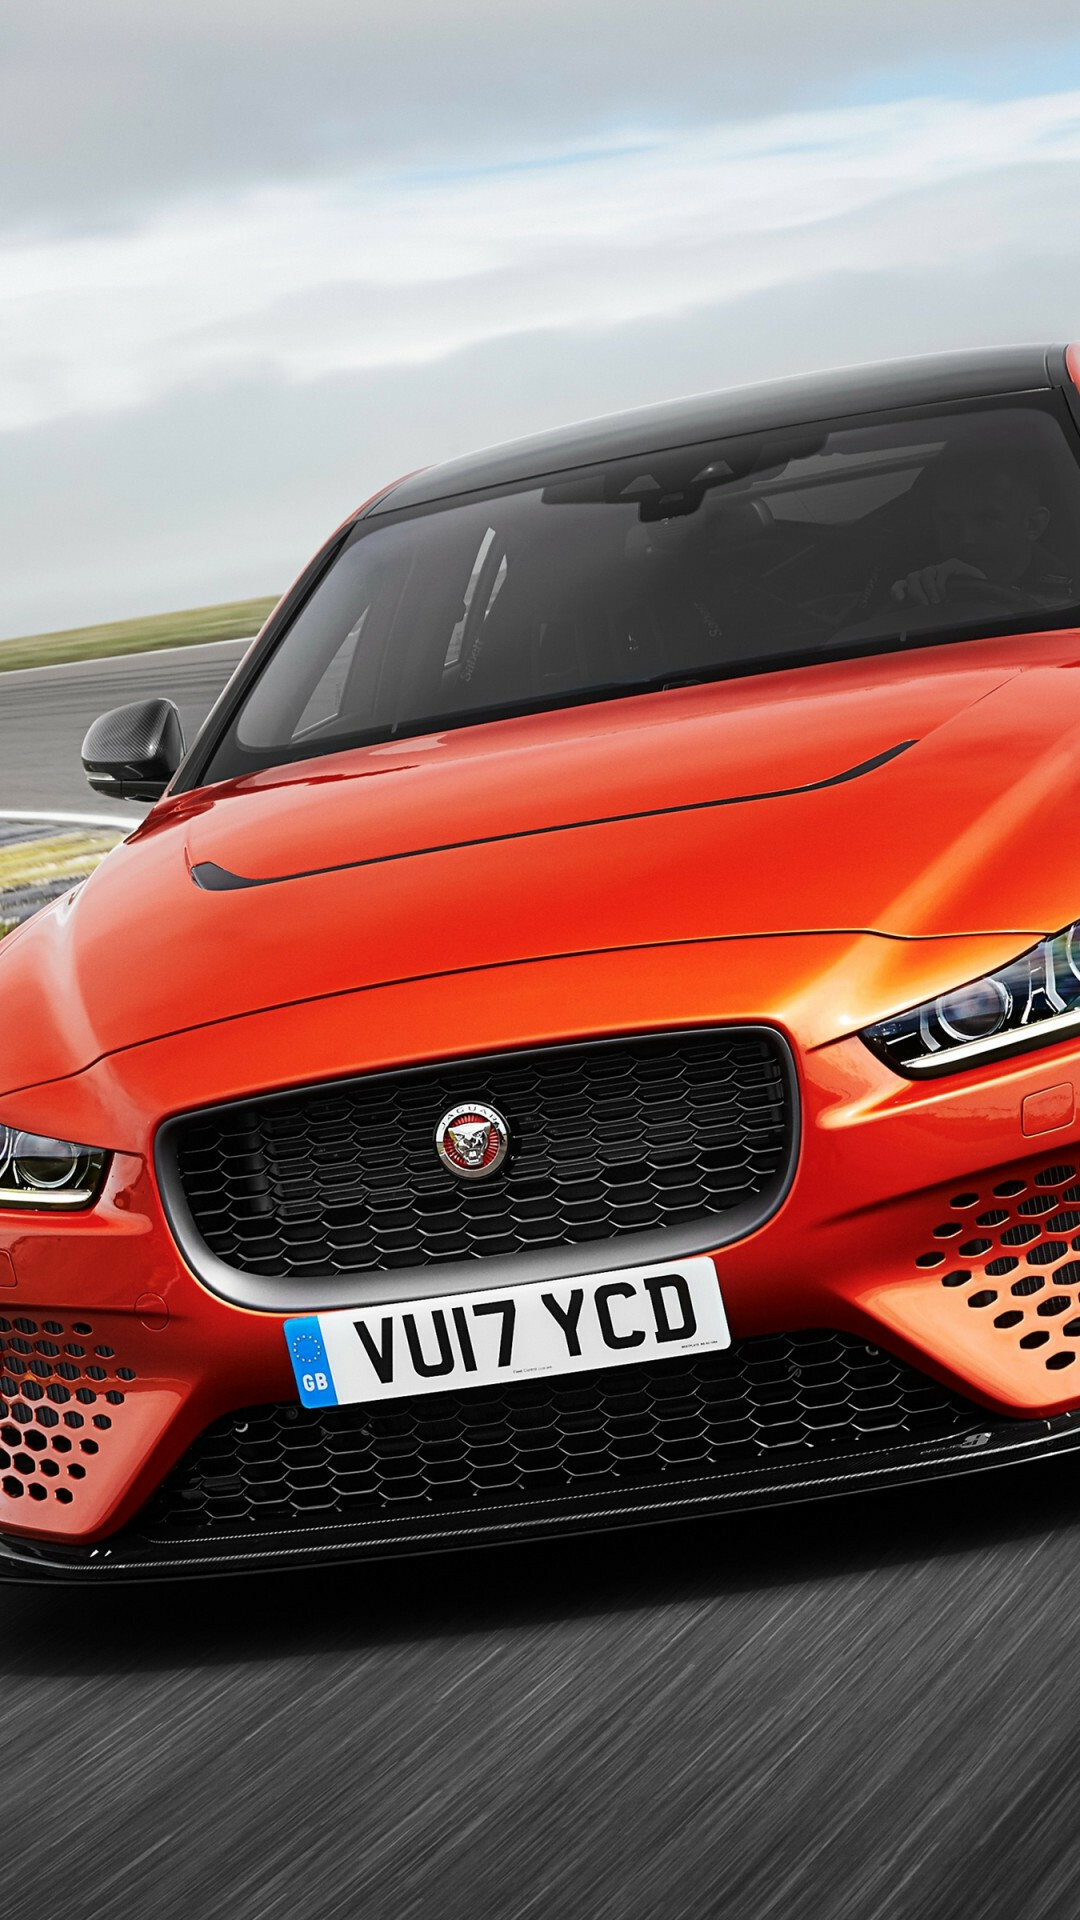 Jaguar Cars: A staple of British automotive engineering, XE SV Project. 1080x1920 Full HD Background.